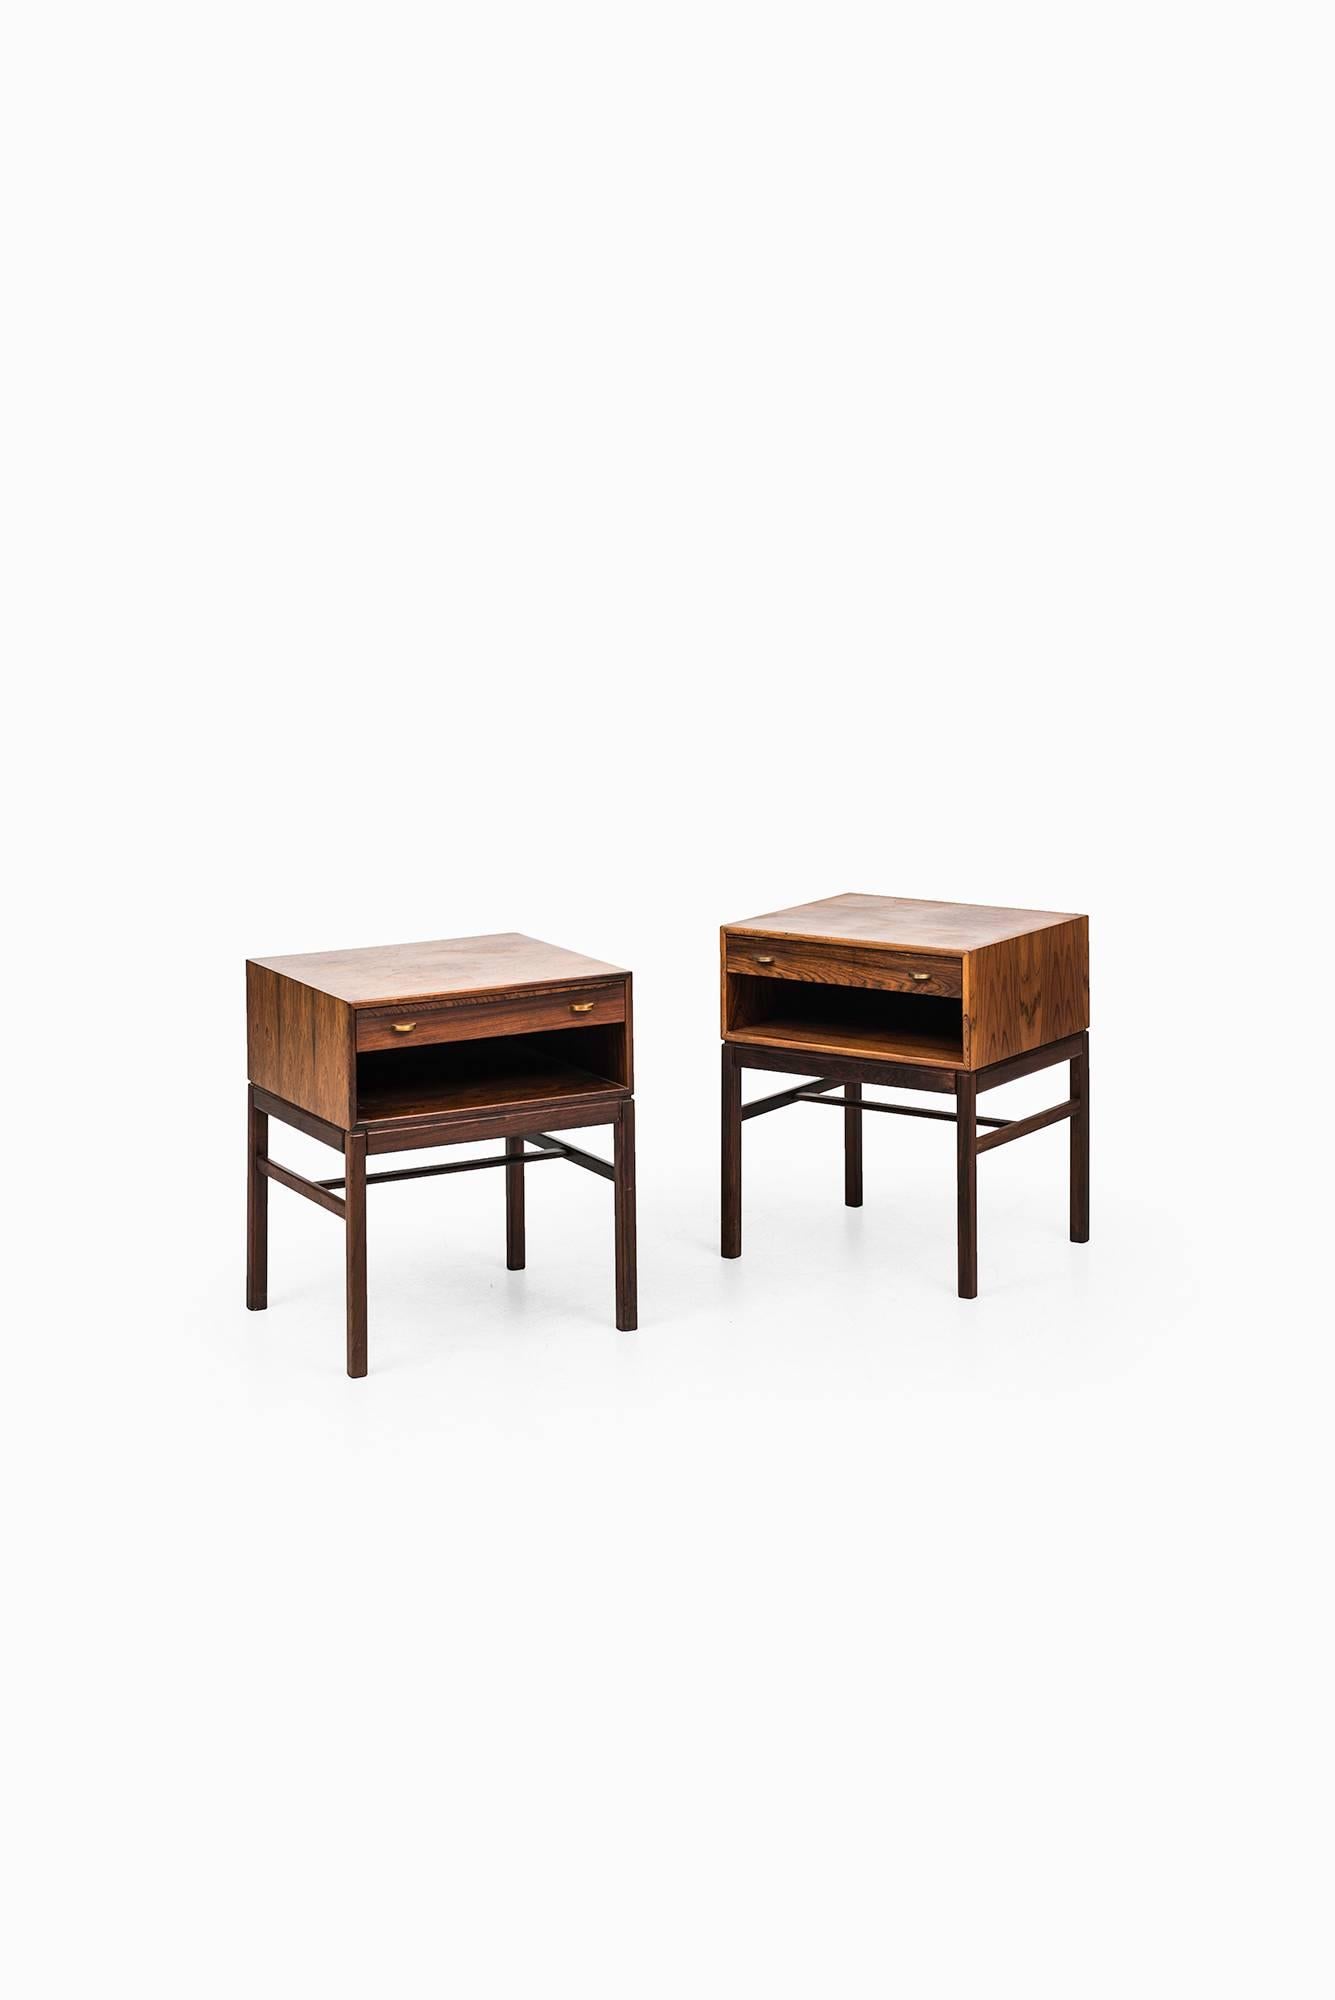 A pair of bedside tables model casino designed by Sven Engström & Gunnar Myrstrand. Produced by Tingströms in Sweden.